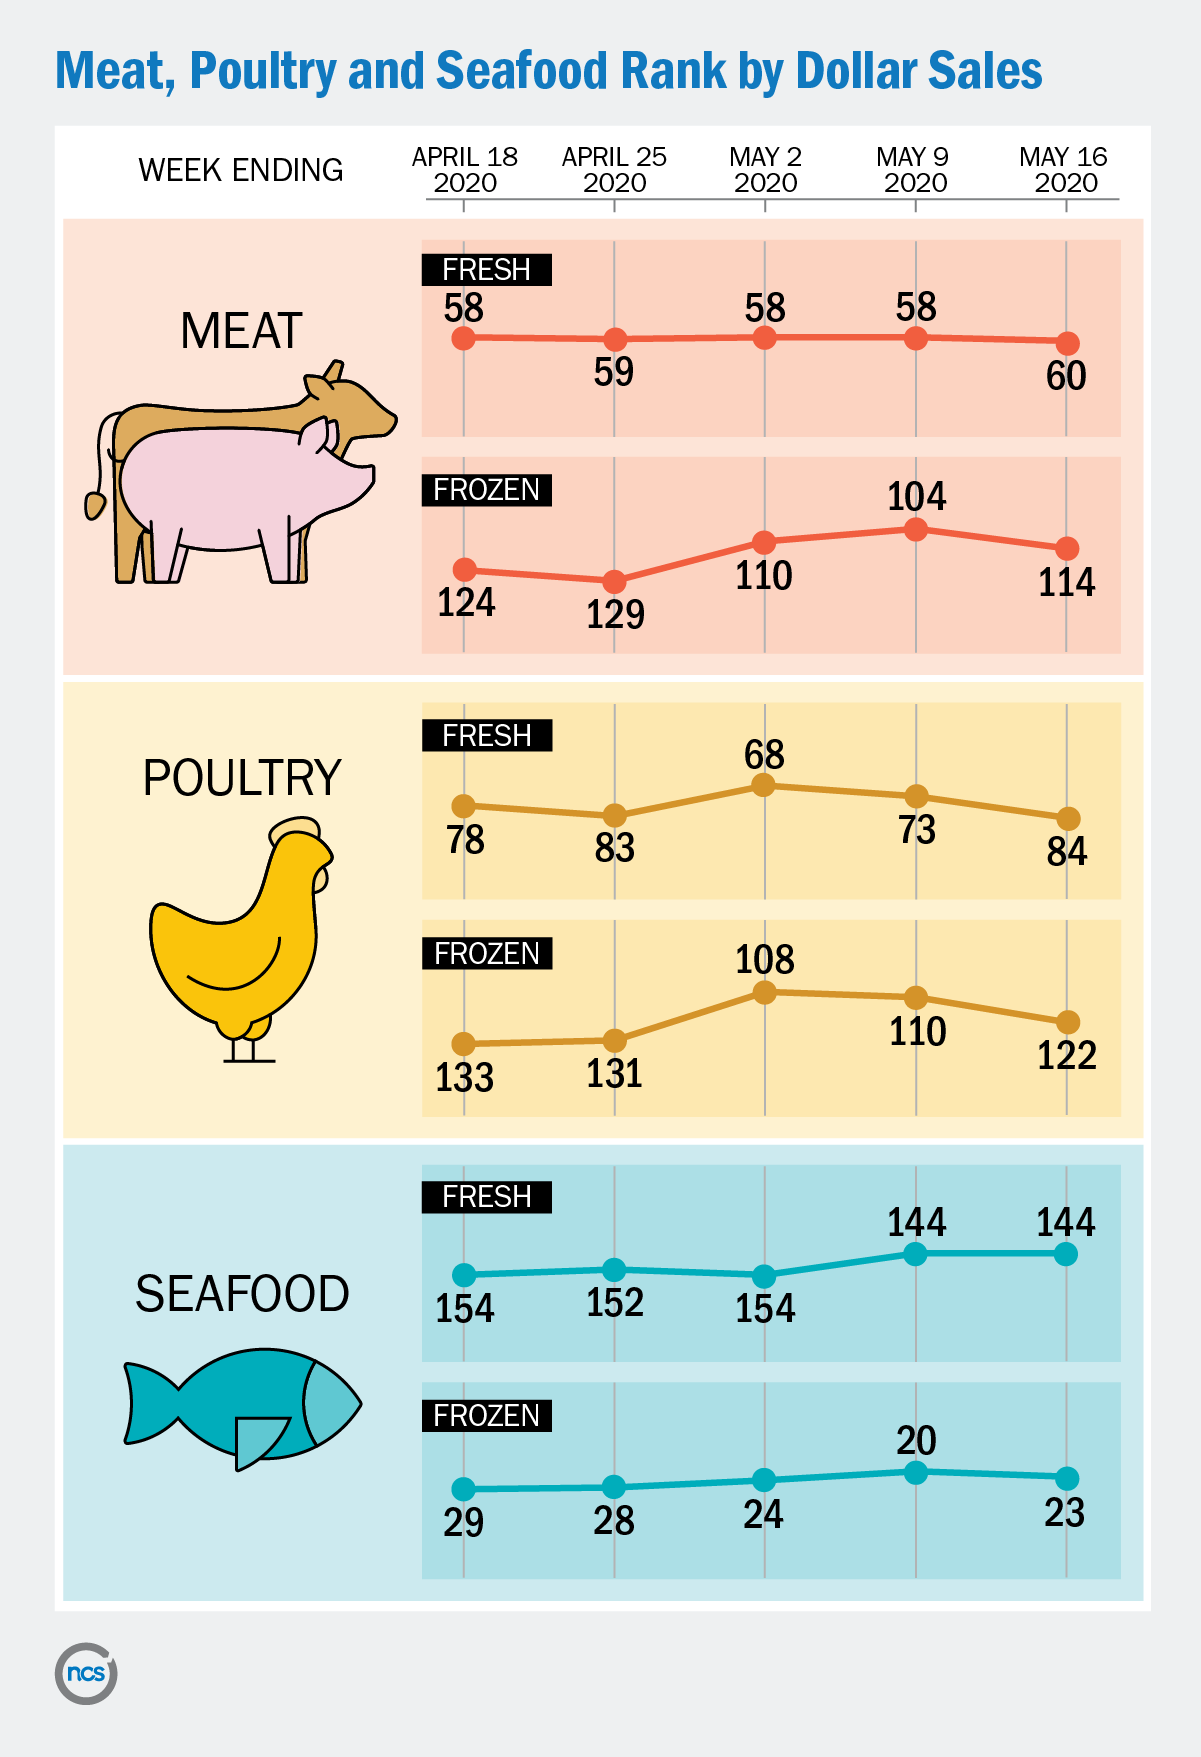 Fresh and frozen meat, poultry and seafood categories are ranked by dollar sales from 4/18/20 to 5/16/20. Fresh seafood rank increased in May compared to others.